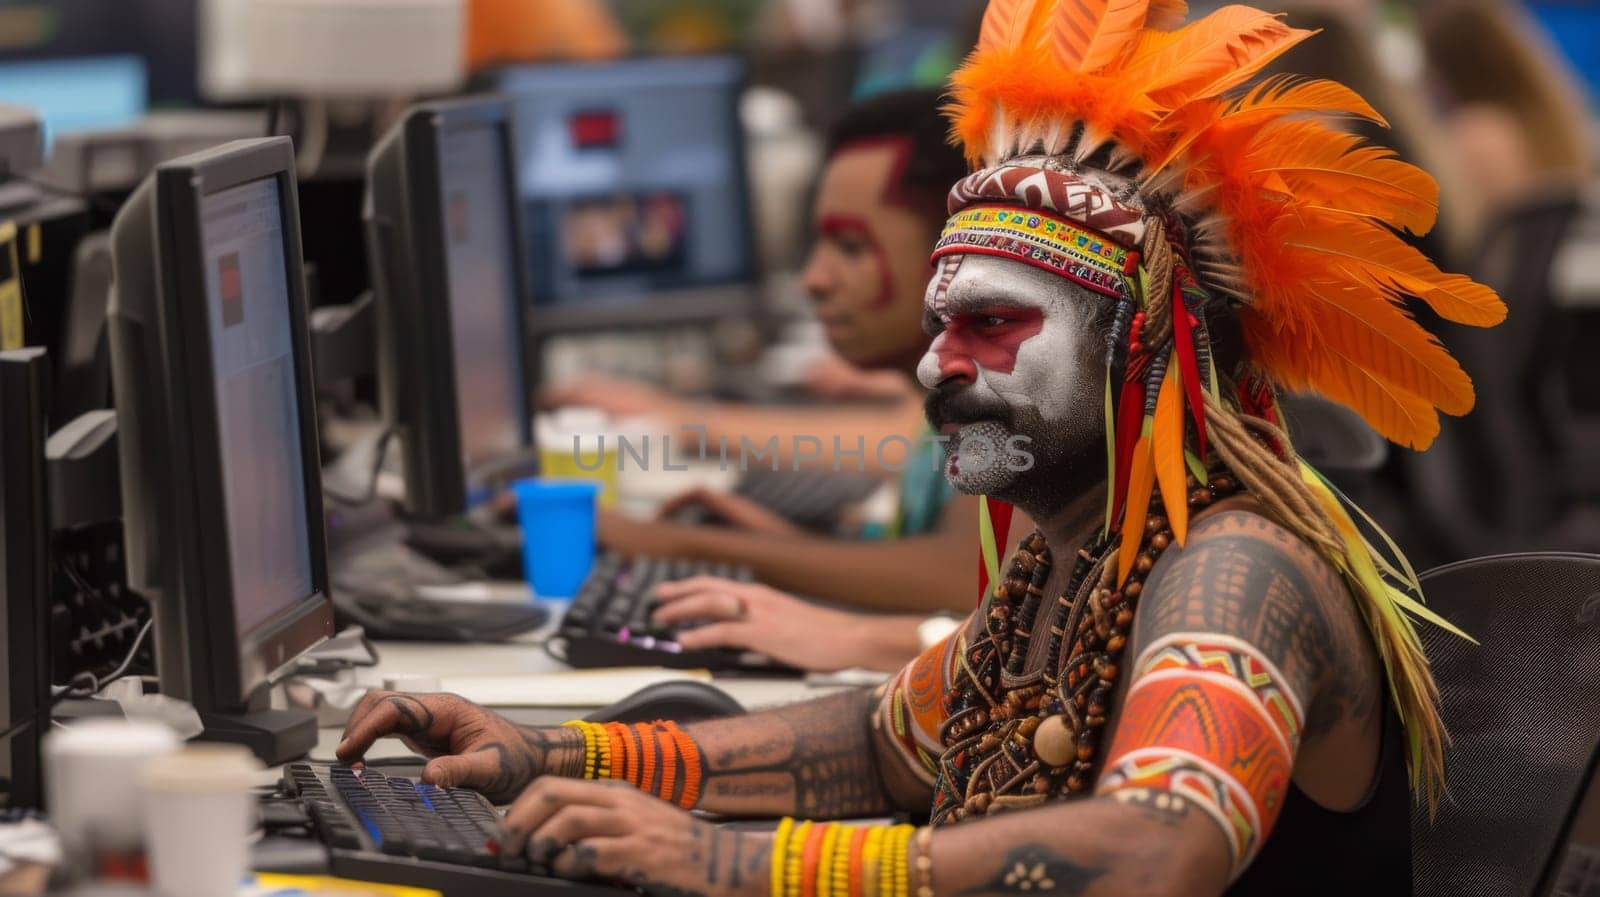 A man with a headdress and feathers on his face sitting at a computer, AI by starush